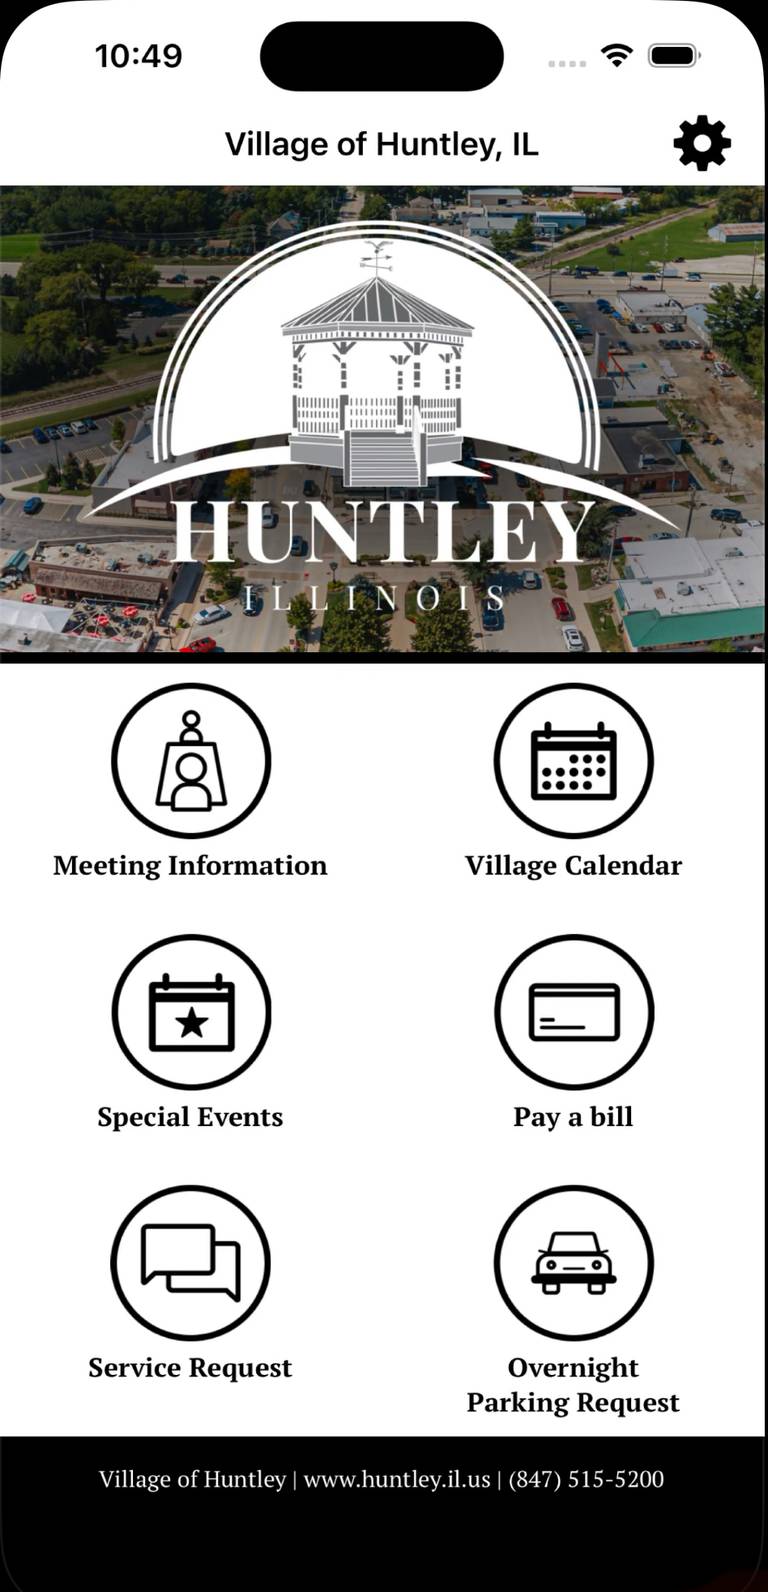 The village of Huntley recently launched an app that includes options for residents to pay bills, request overnight parking and see upcoming meetings, among other items.